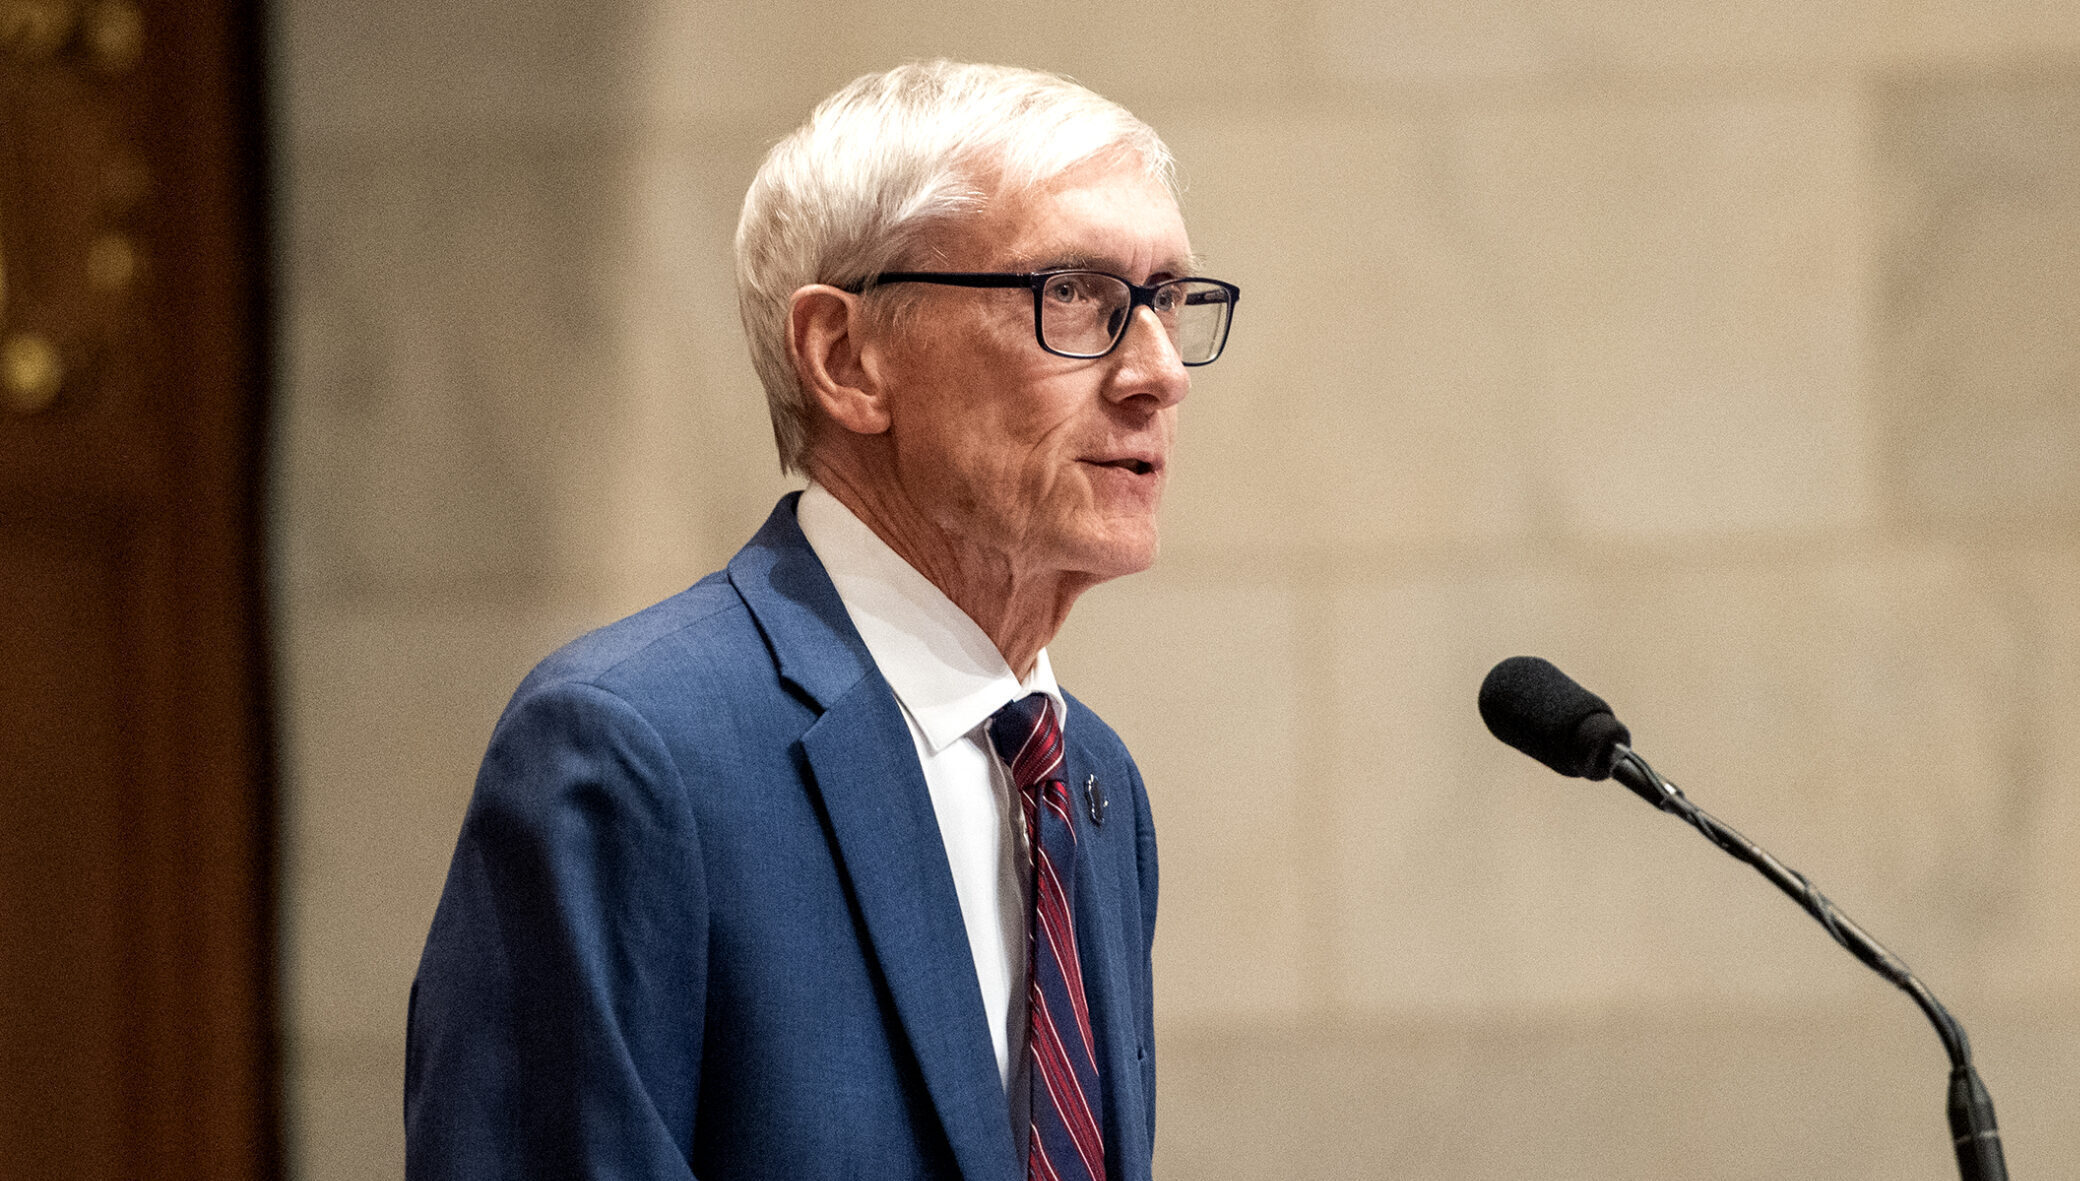 After state withholds funds for Milwaukee Public Schools, Evers calls for sweeping audits